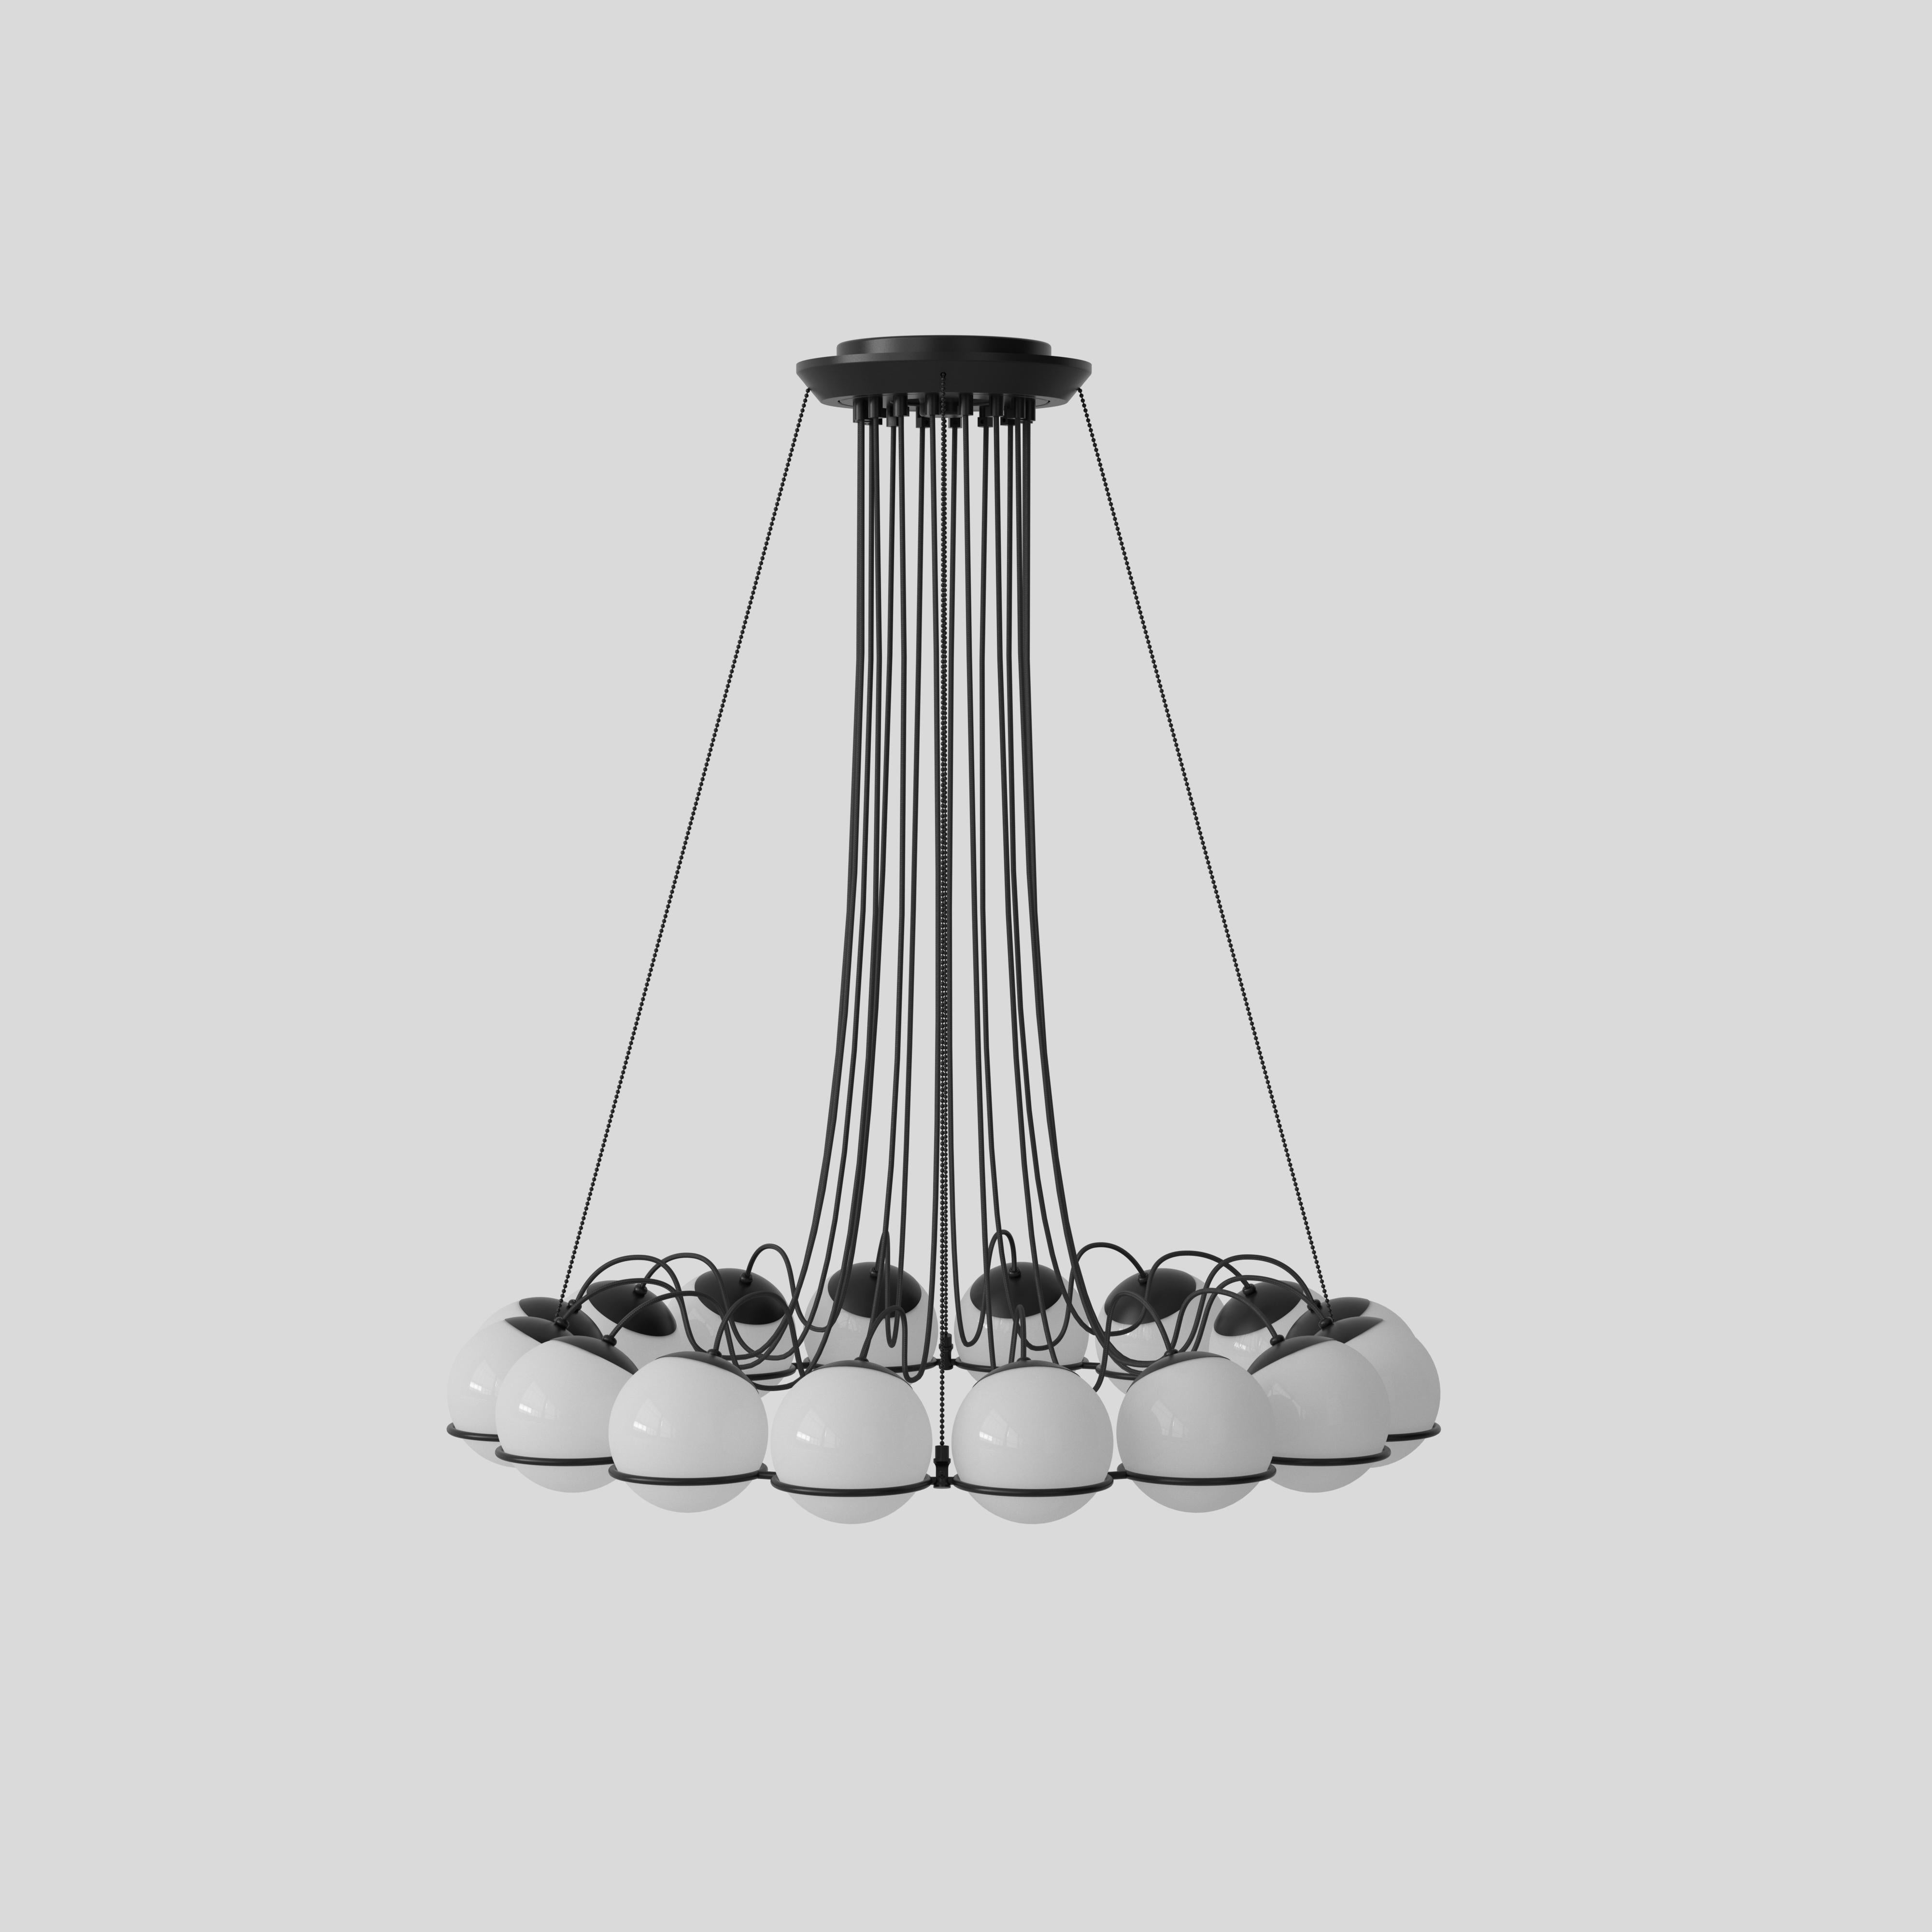 Model 2109
Design by Gino Sarfatti
The Le Sfere chandelier is composed of a circular array of blown opaline glass spheres. Each sphere is held in place by a large black or Champagne painted aluminum ring-structure. Each ring has a small cut,